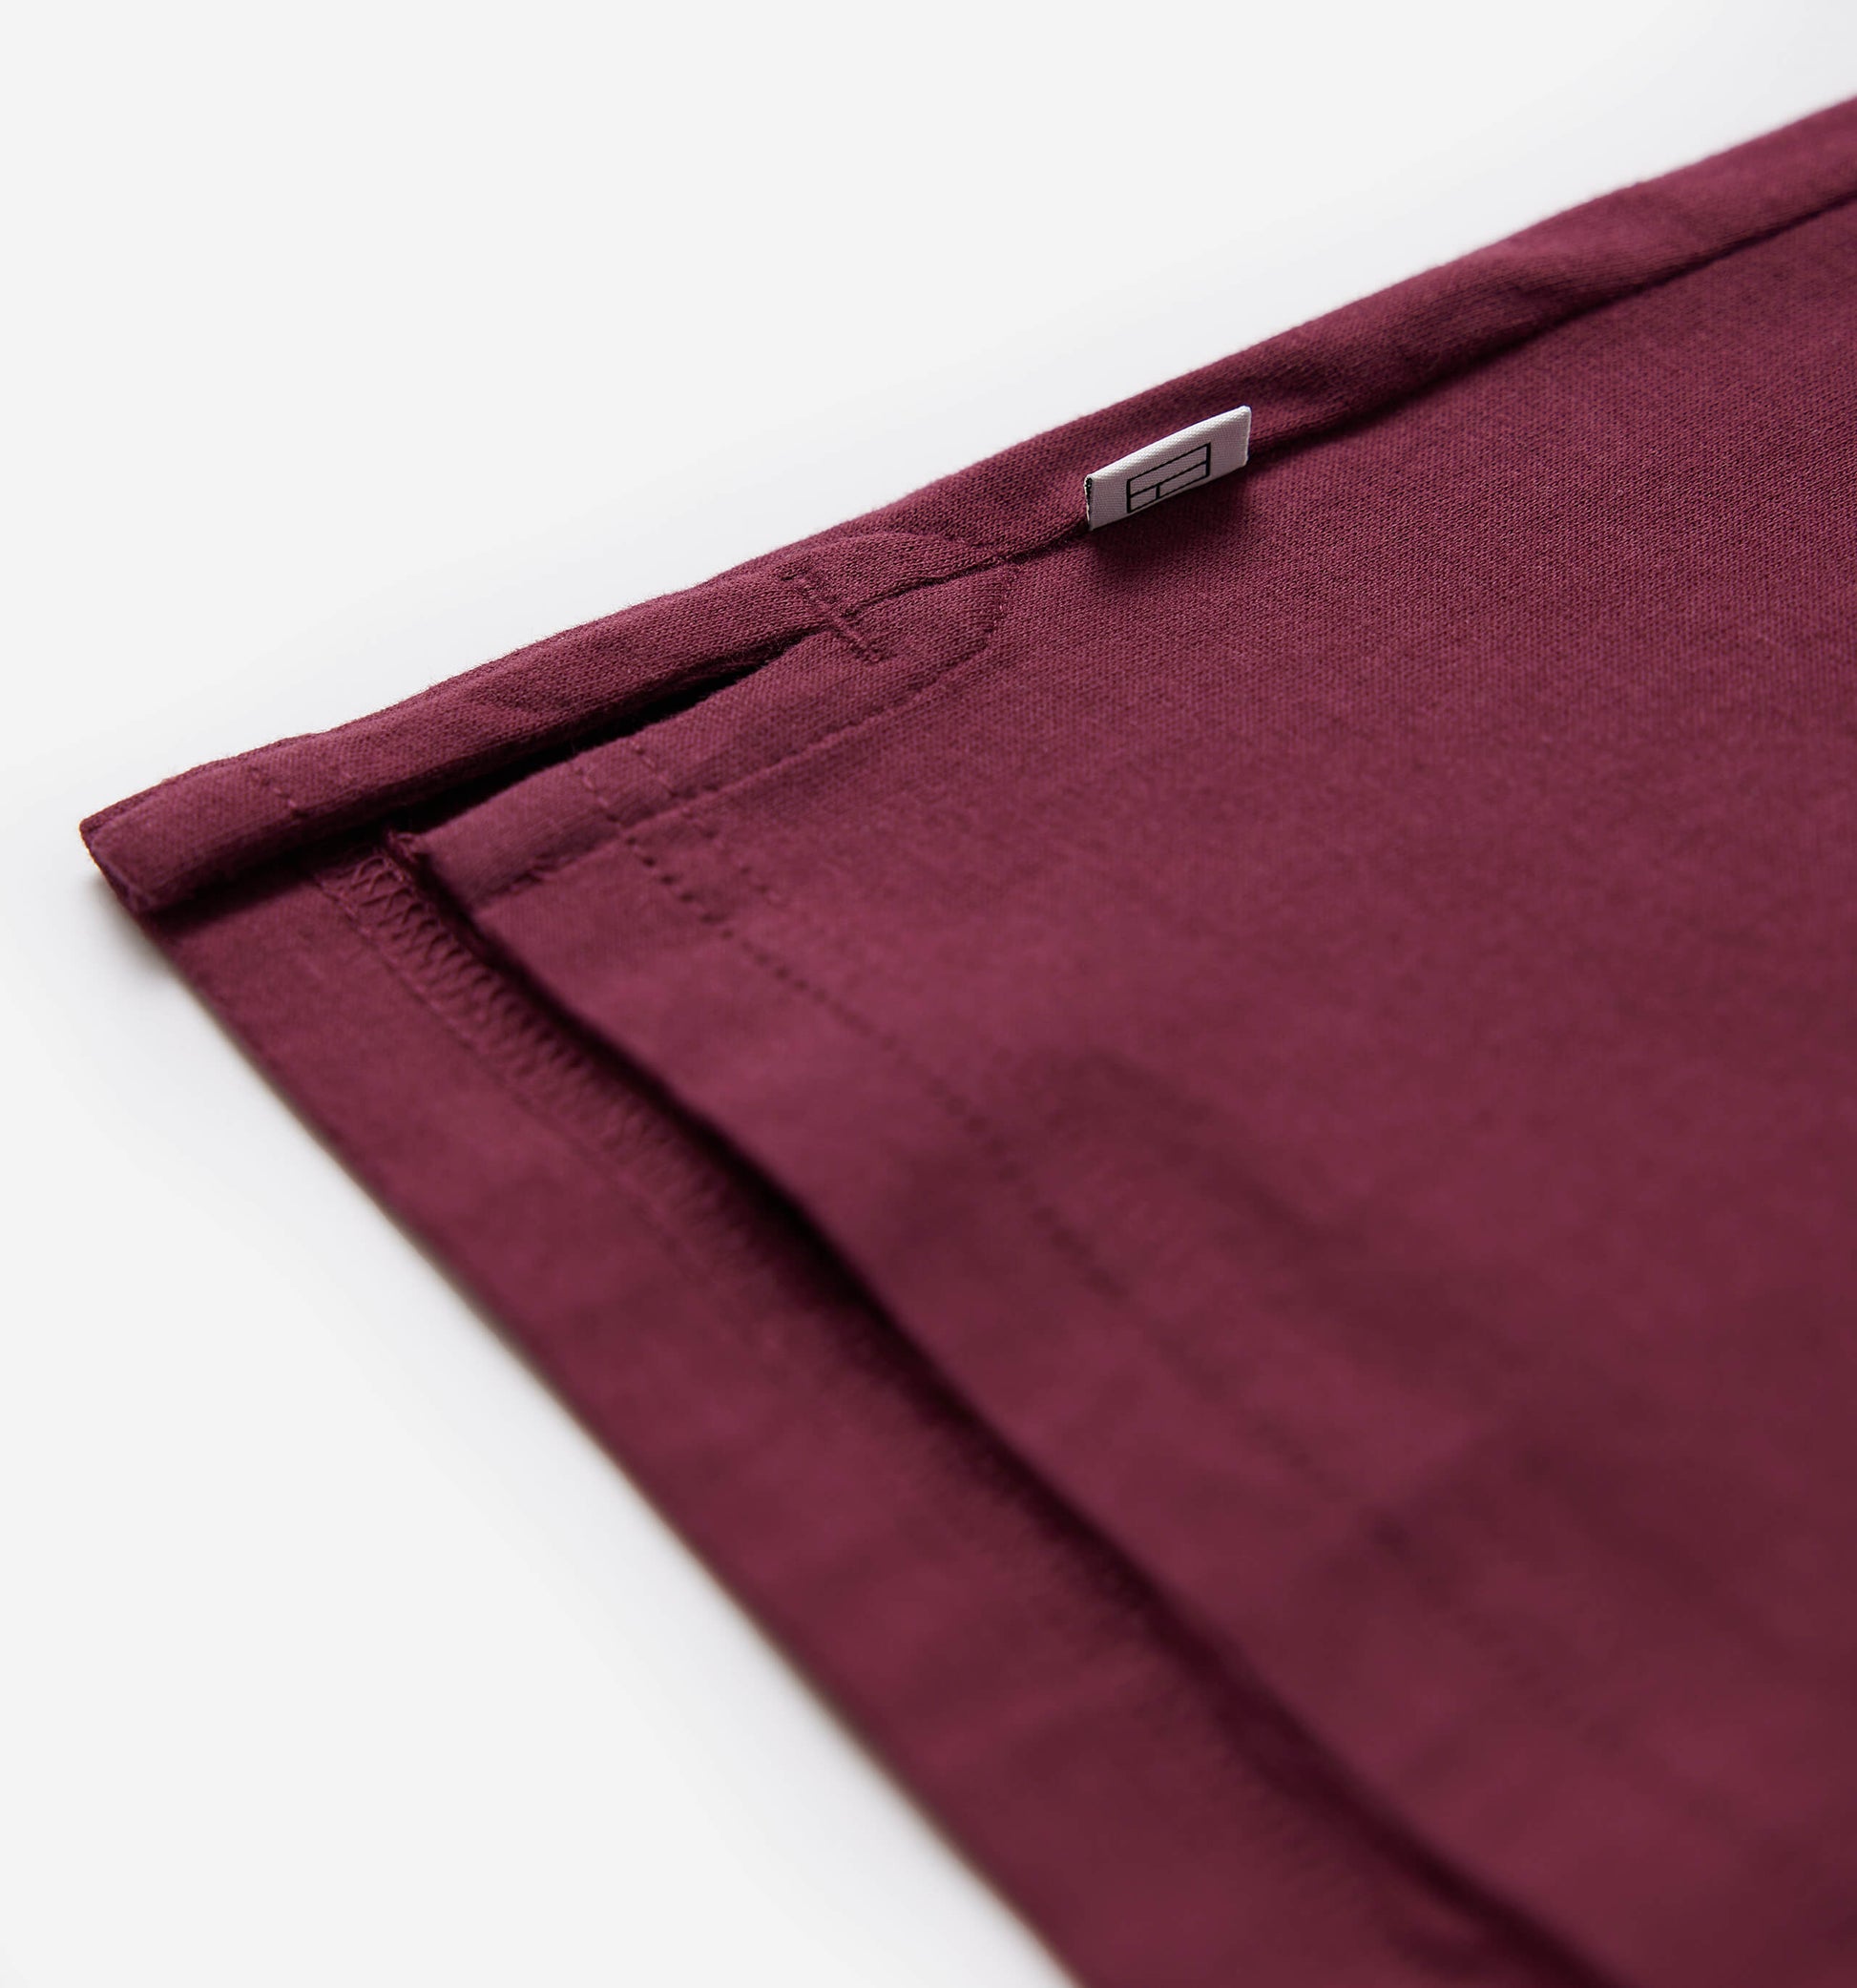 The James - Jersey Cotton Polo In Burgundy From King Essentials